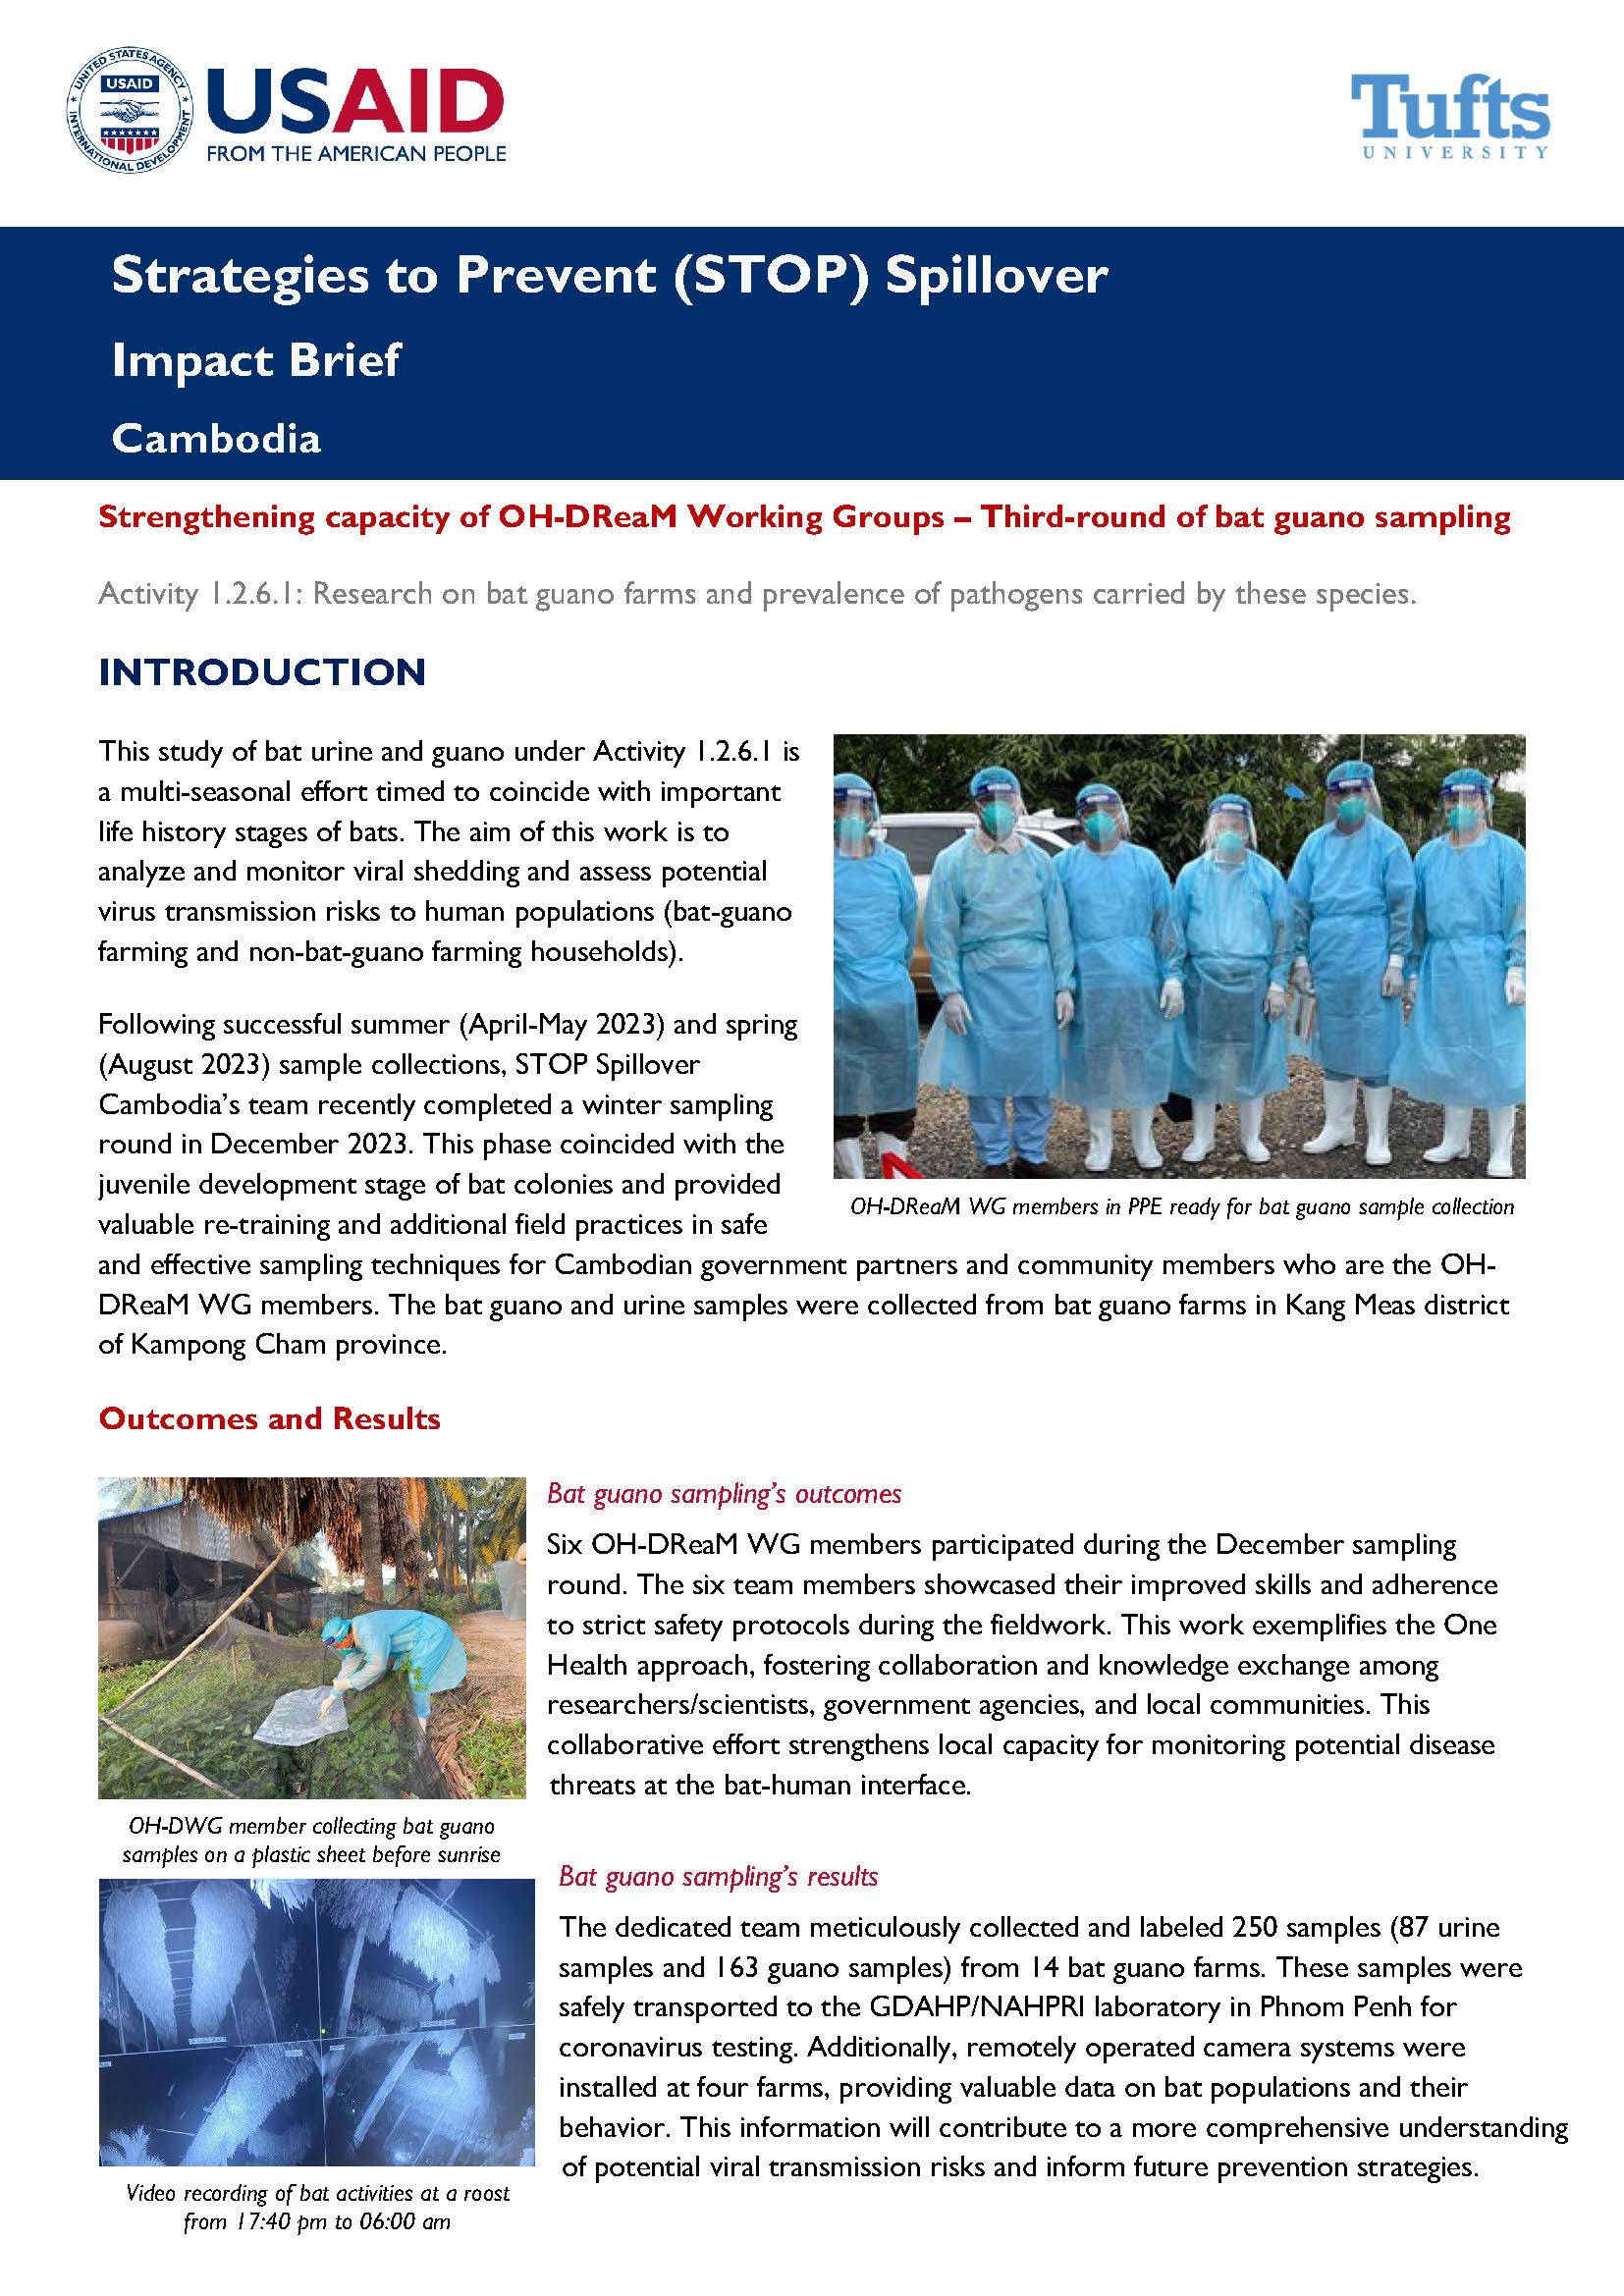 Thumbnail of the impact brief.